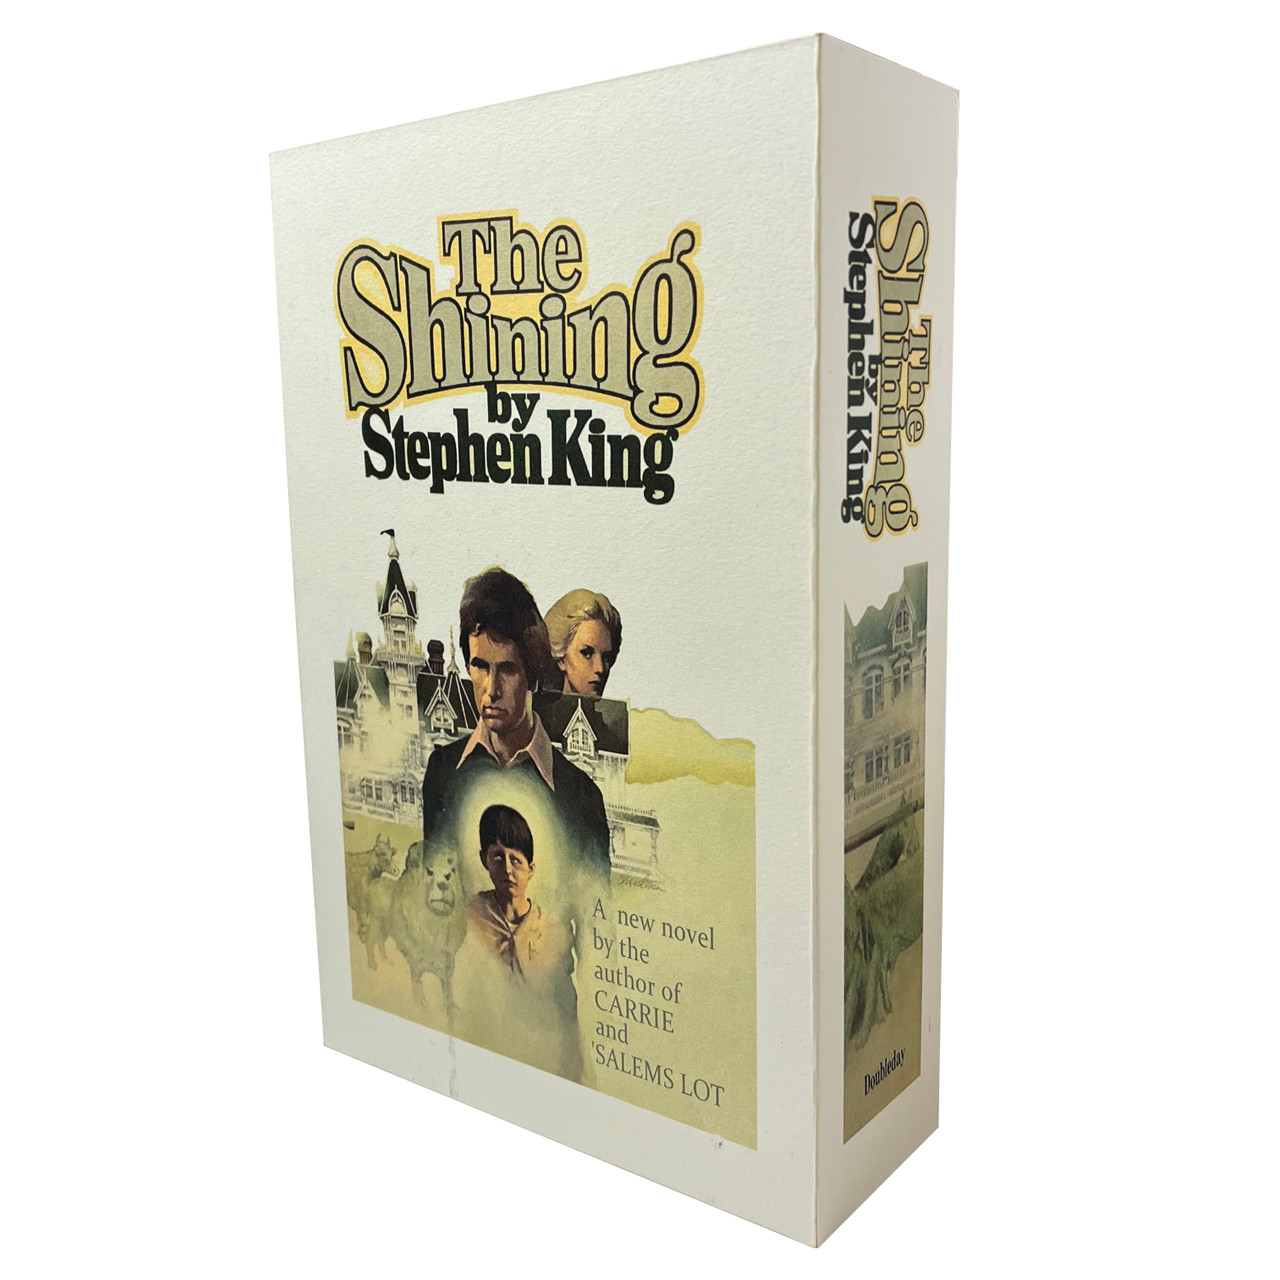 Doubleday 1977, Stephen King "The Shining" First Edition, First Printing w/Custom Slipcase